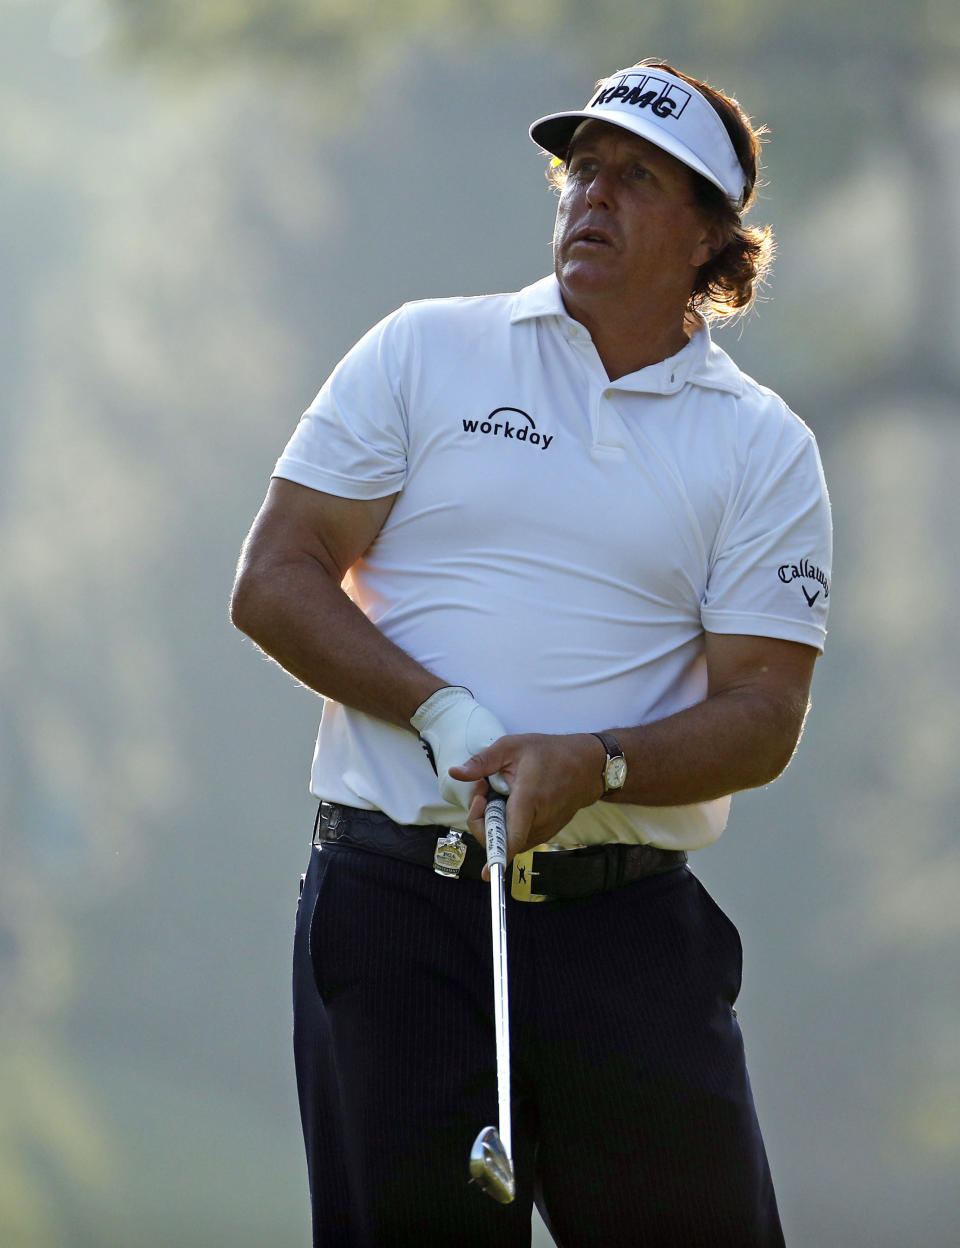 Phil Mickelson watches his tee shot on the 13th hole during the second round of the PGA Championship golf tournament at Bellerive Country Club, Saturday, Aug. 11, 2018, in St. Louis. (AP Photo/Charlie Riedel)